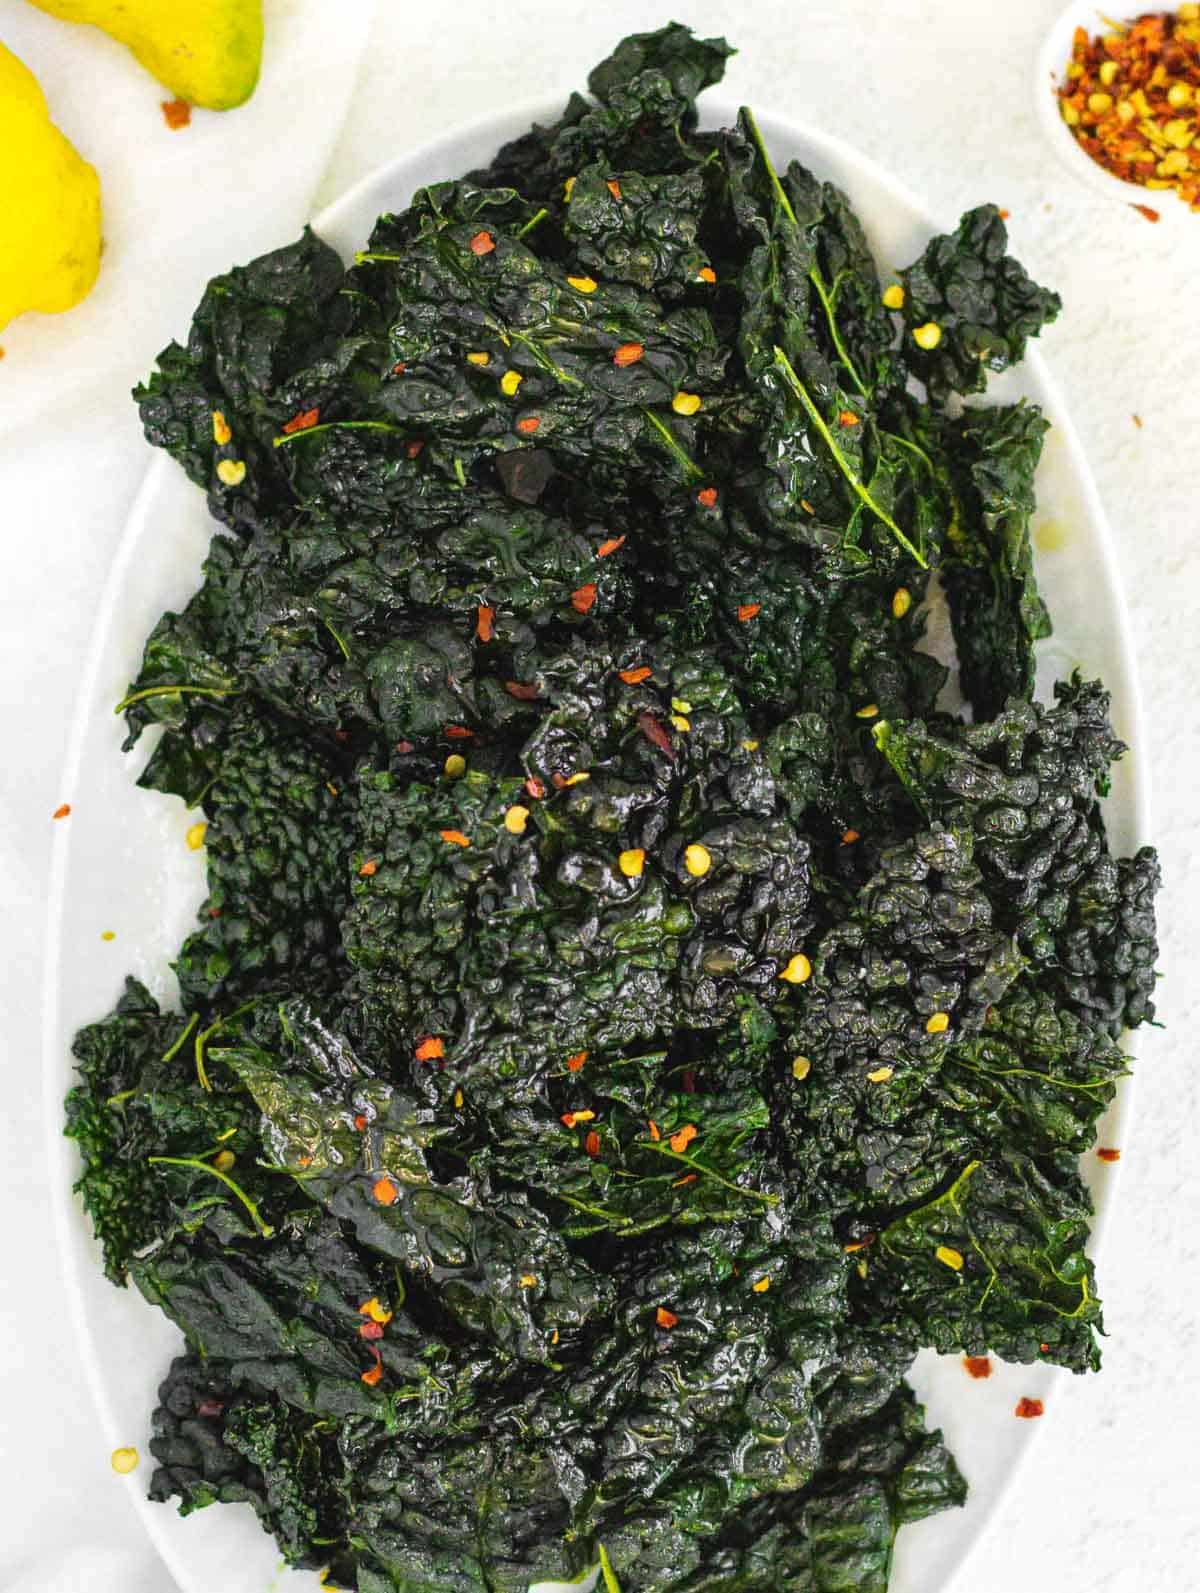 Kale chips and lemon and red pepper flakes